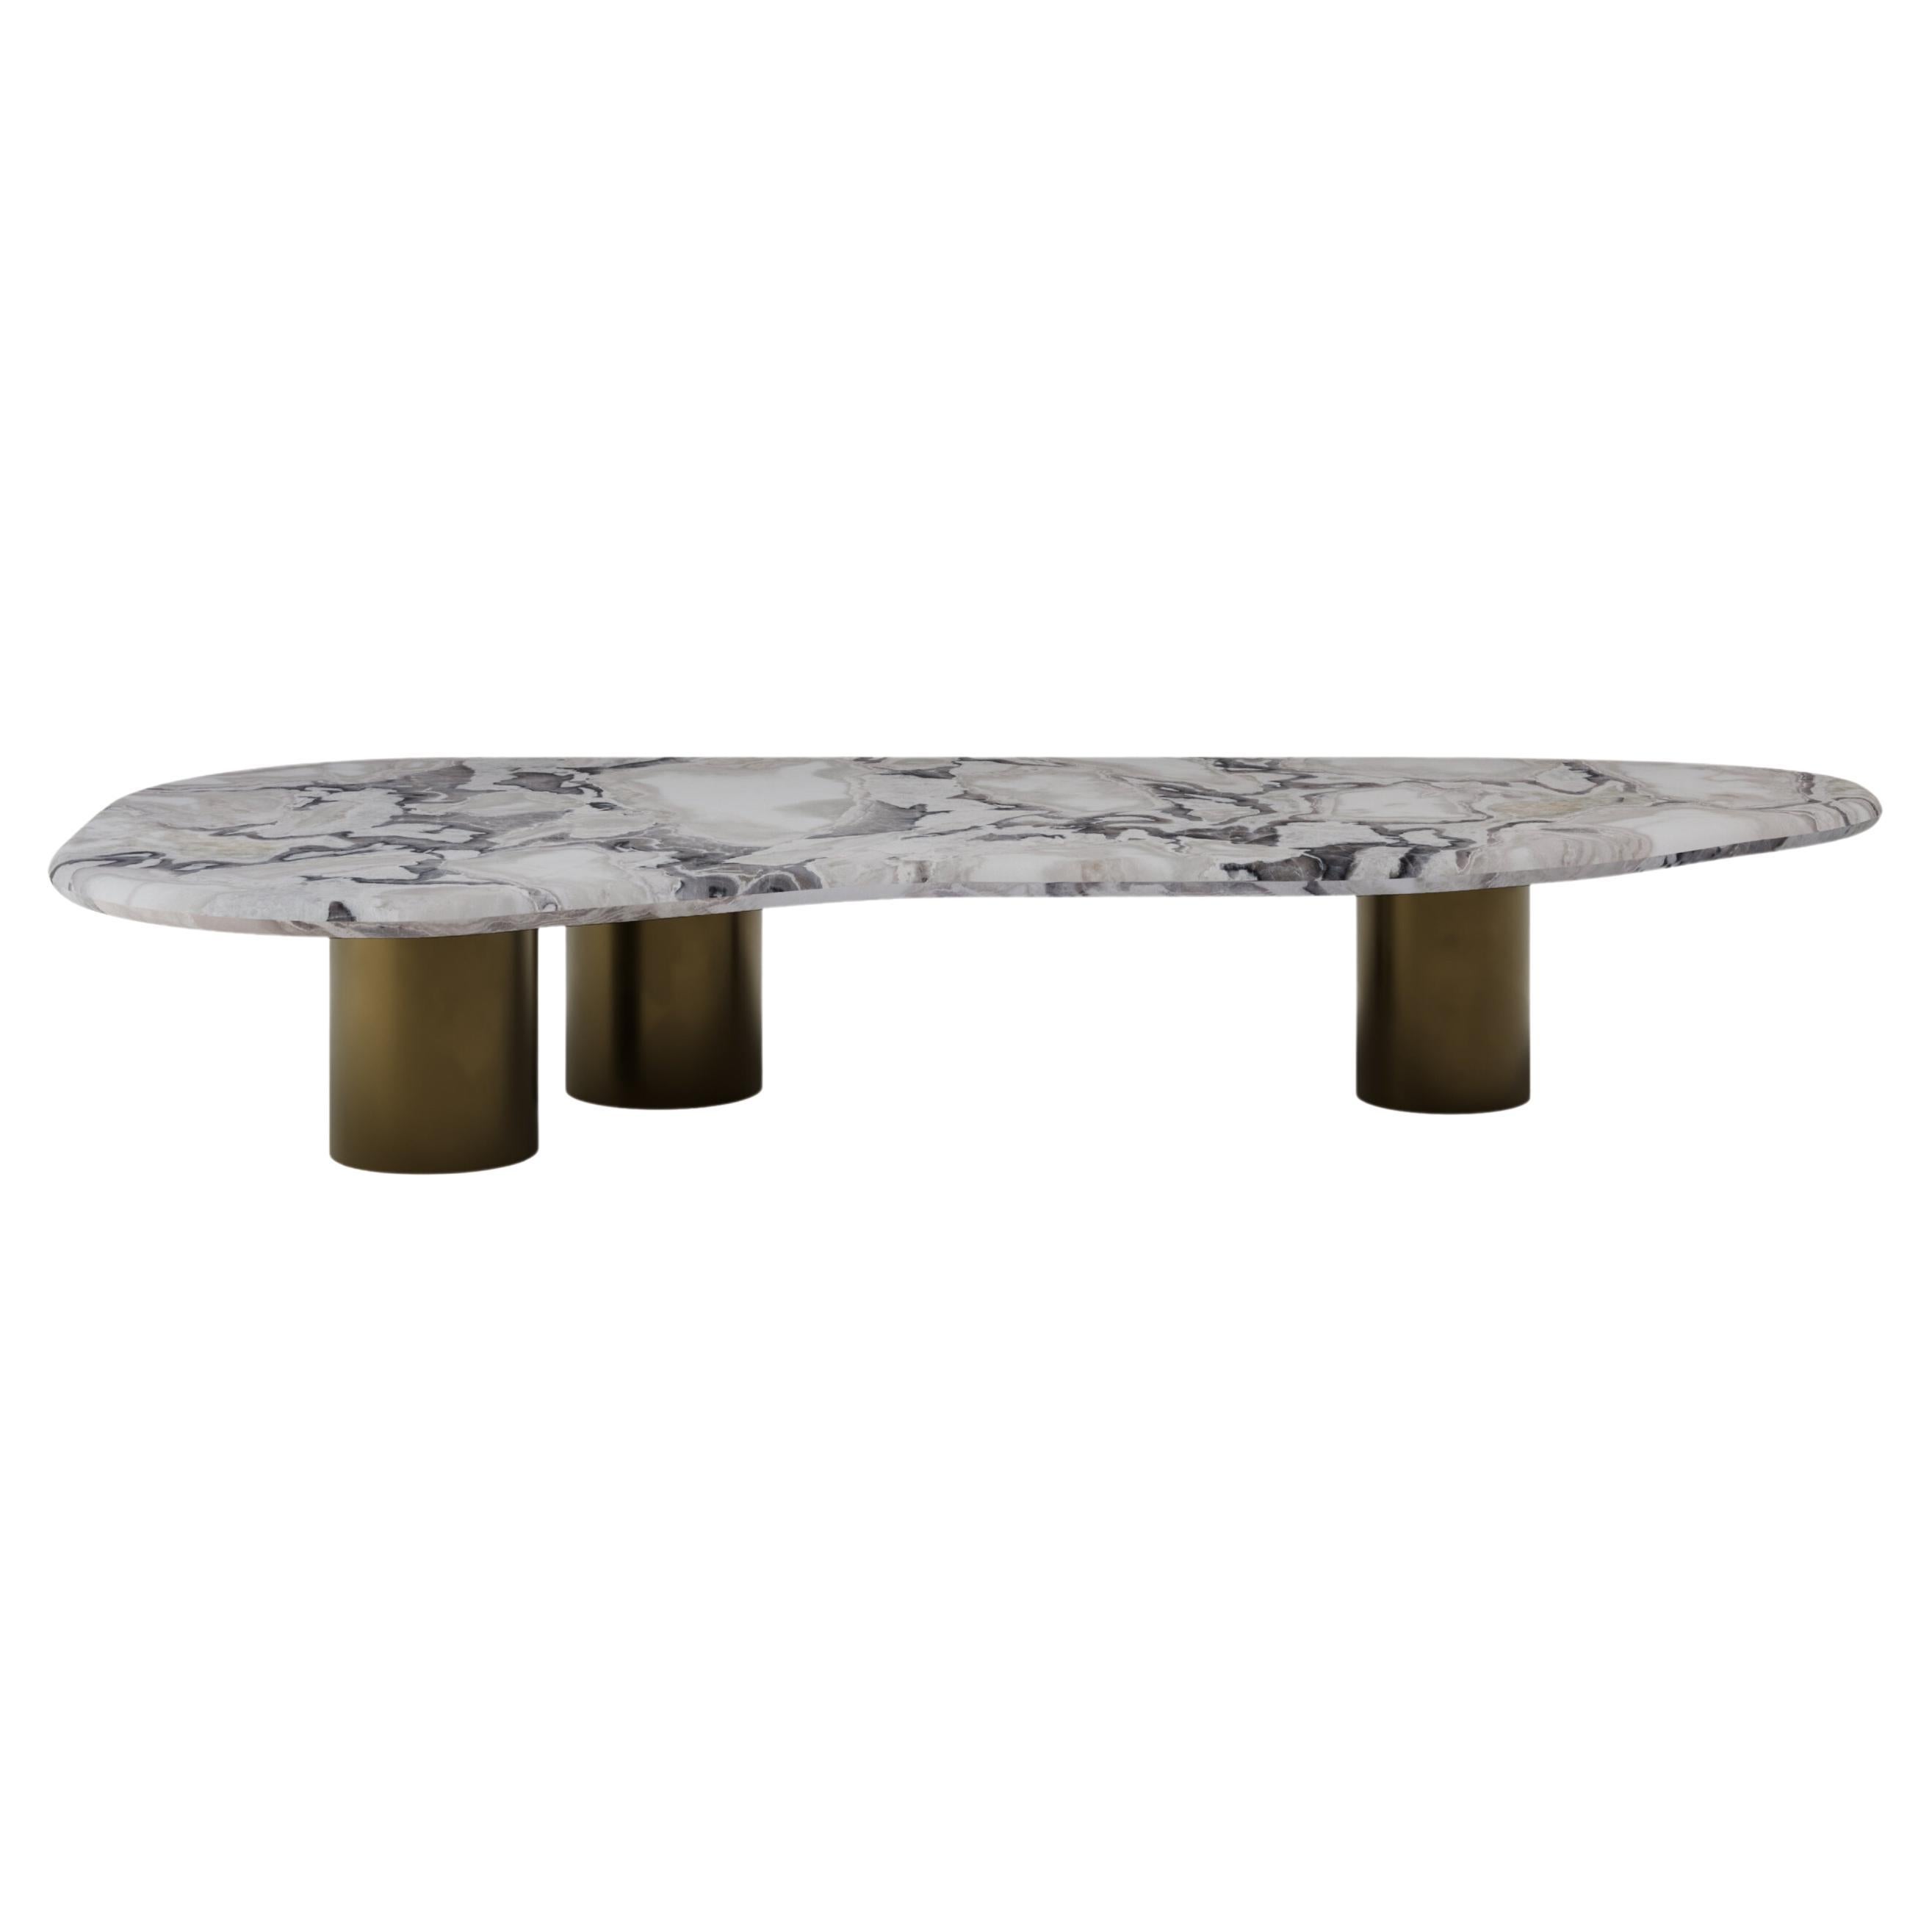 FORM(LA) Lago Freeform Coffee Table 60”L x 30”W x 12”H Oyster Marble & Bronze For Sale